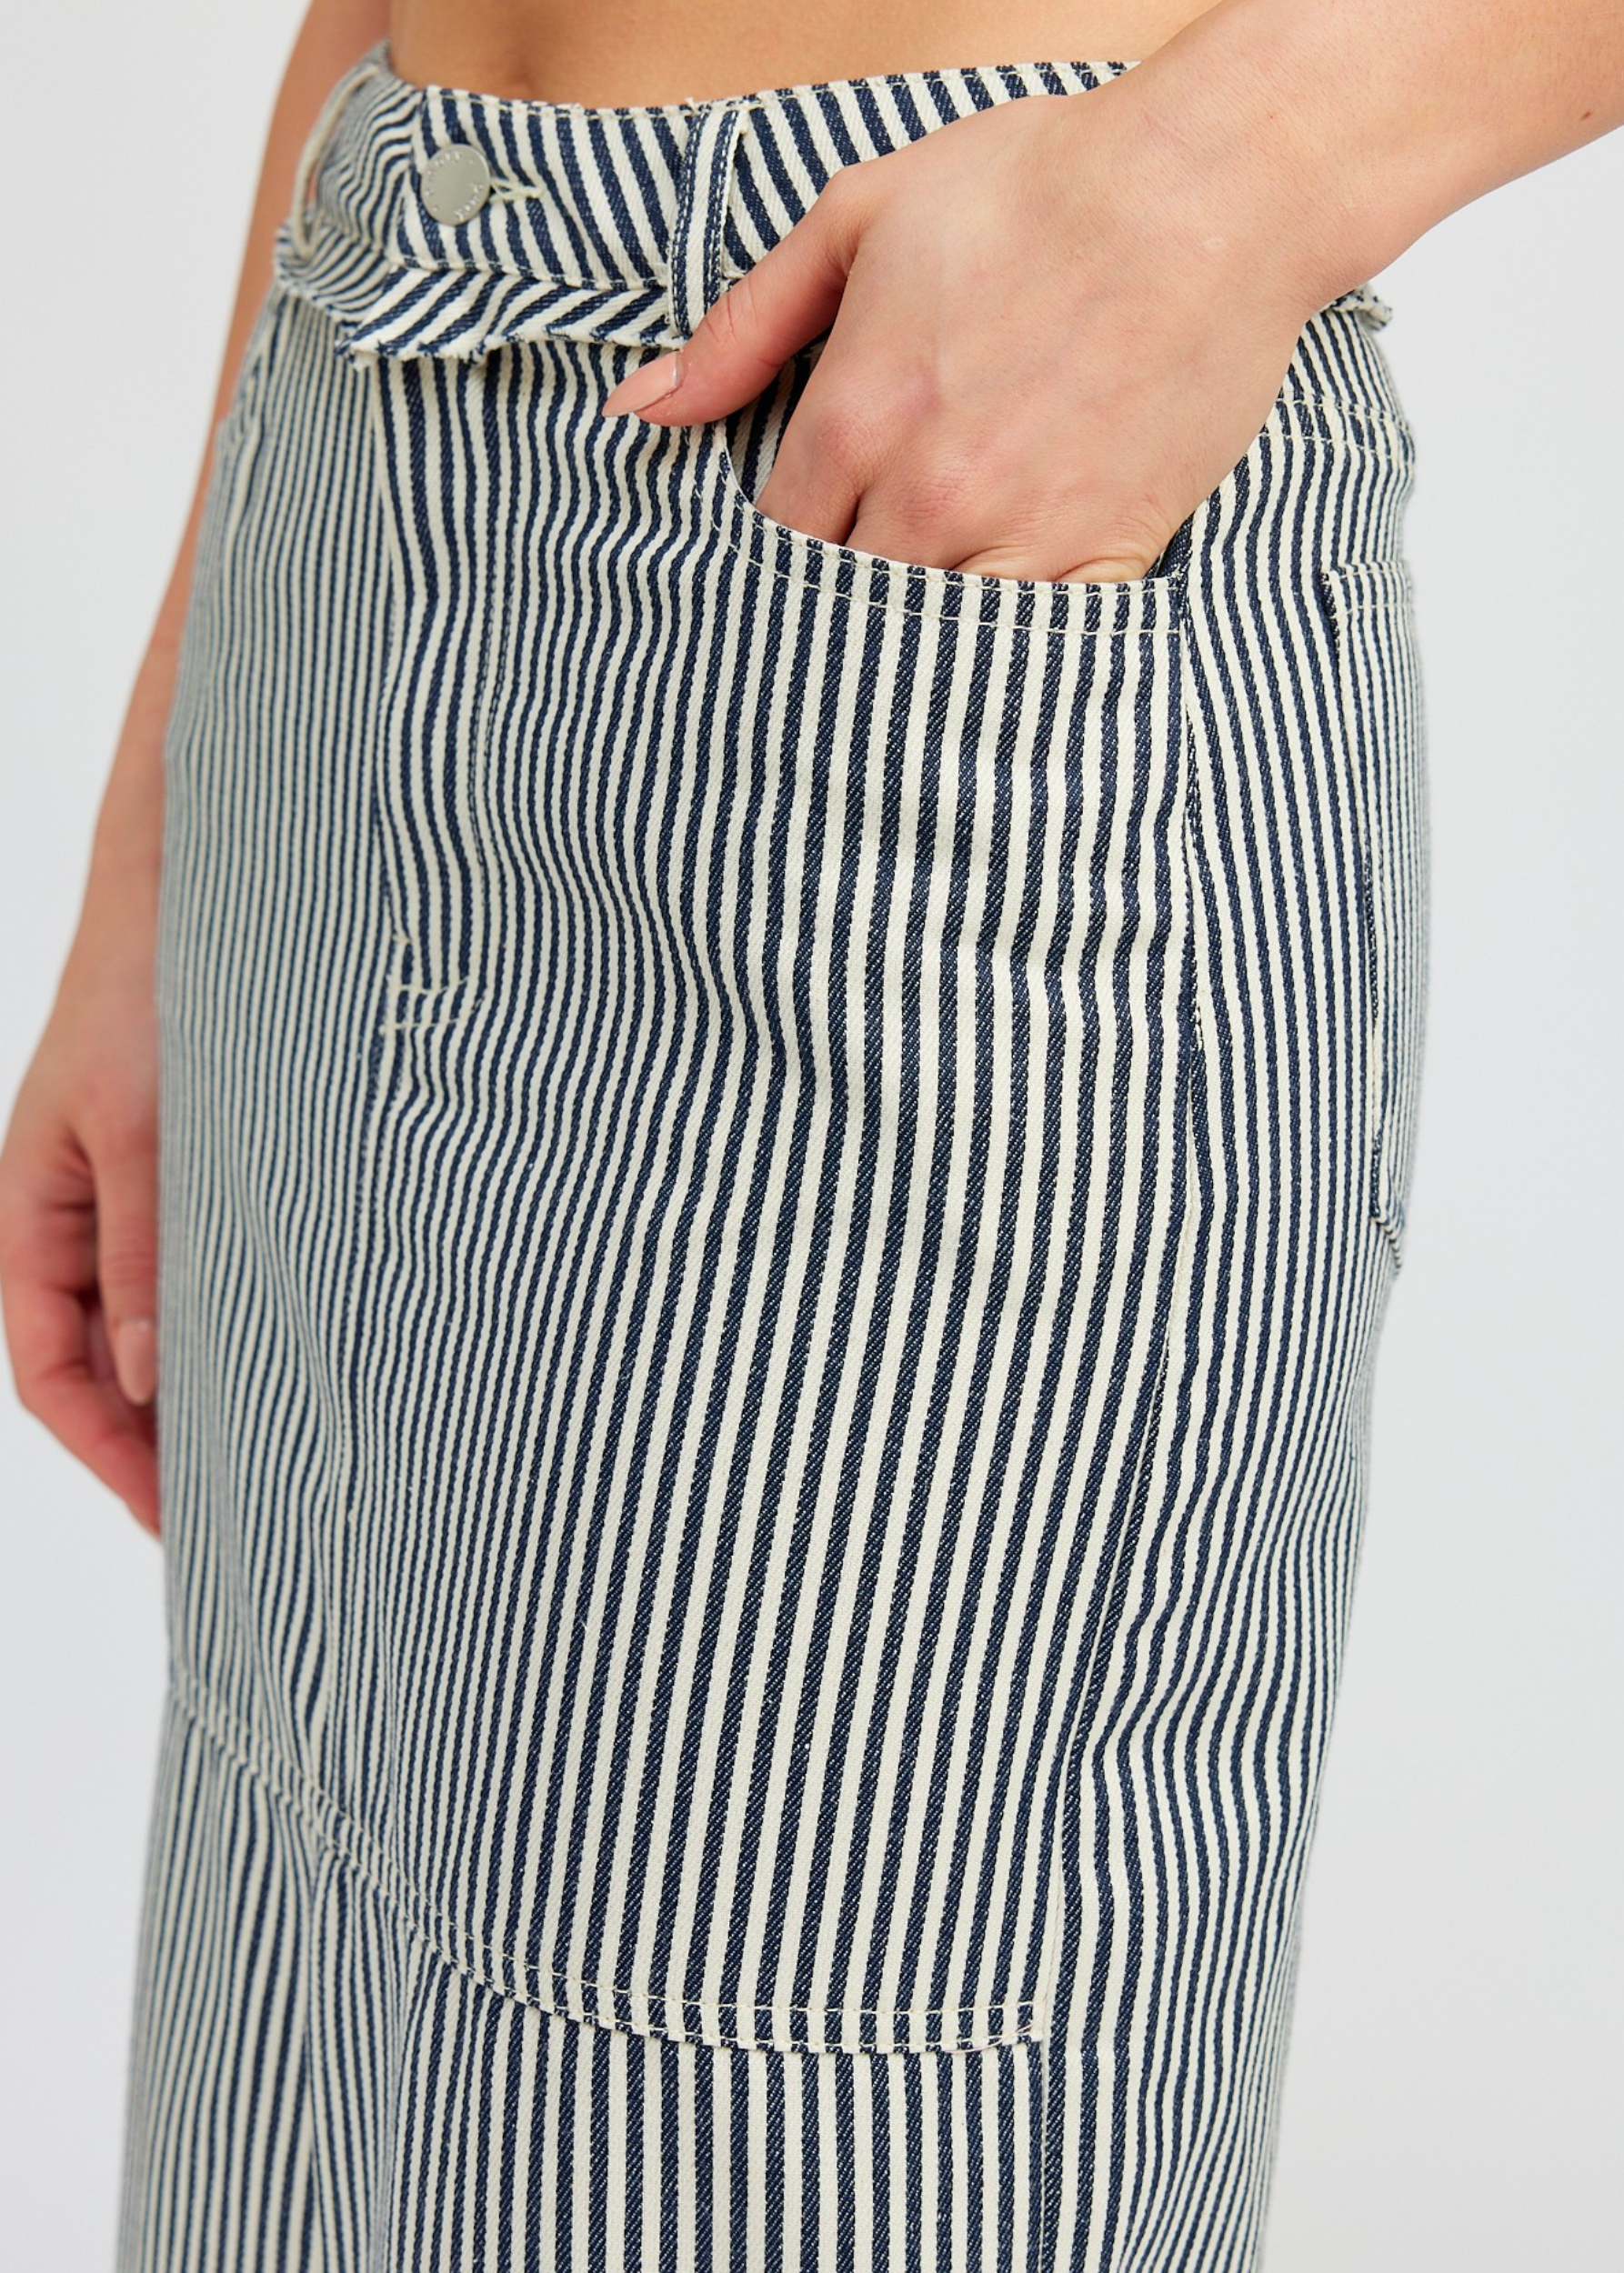 STRIPED TWILL MAXI SKIRT WITH SLIT